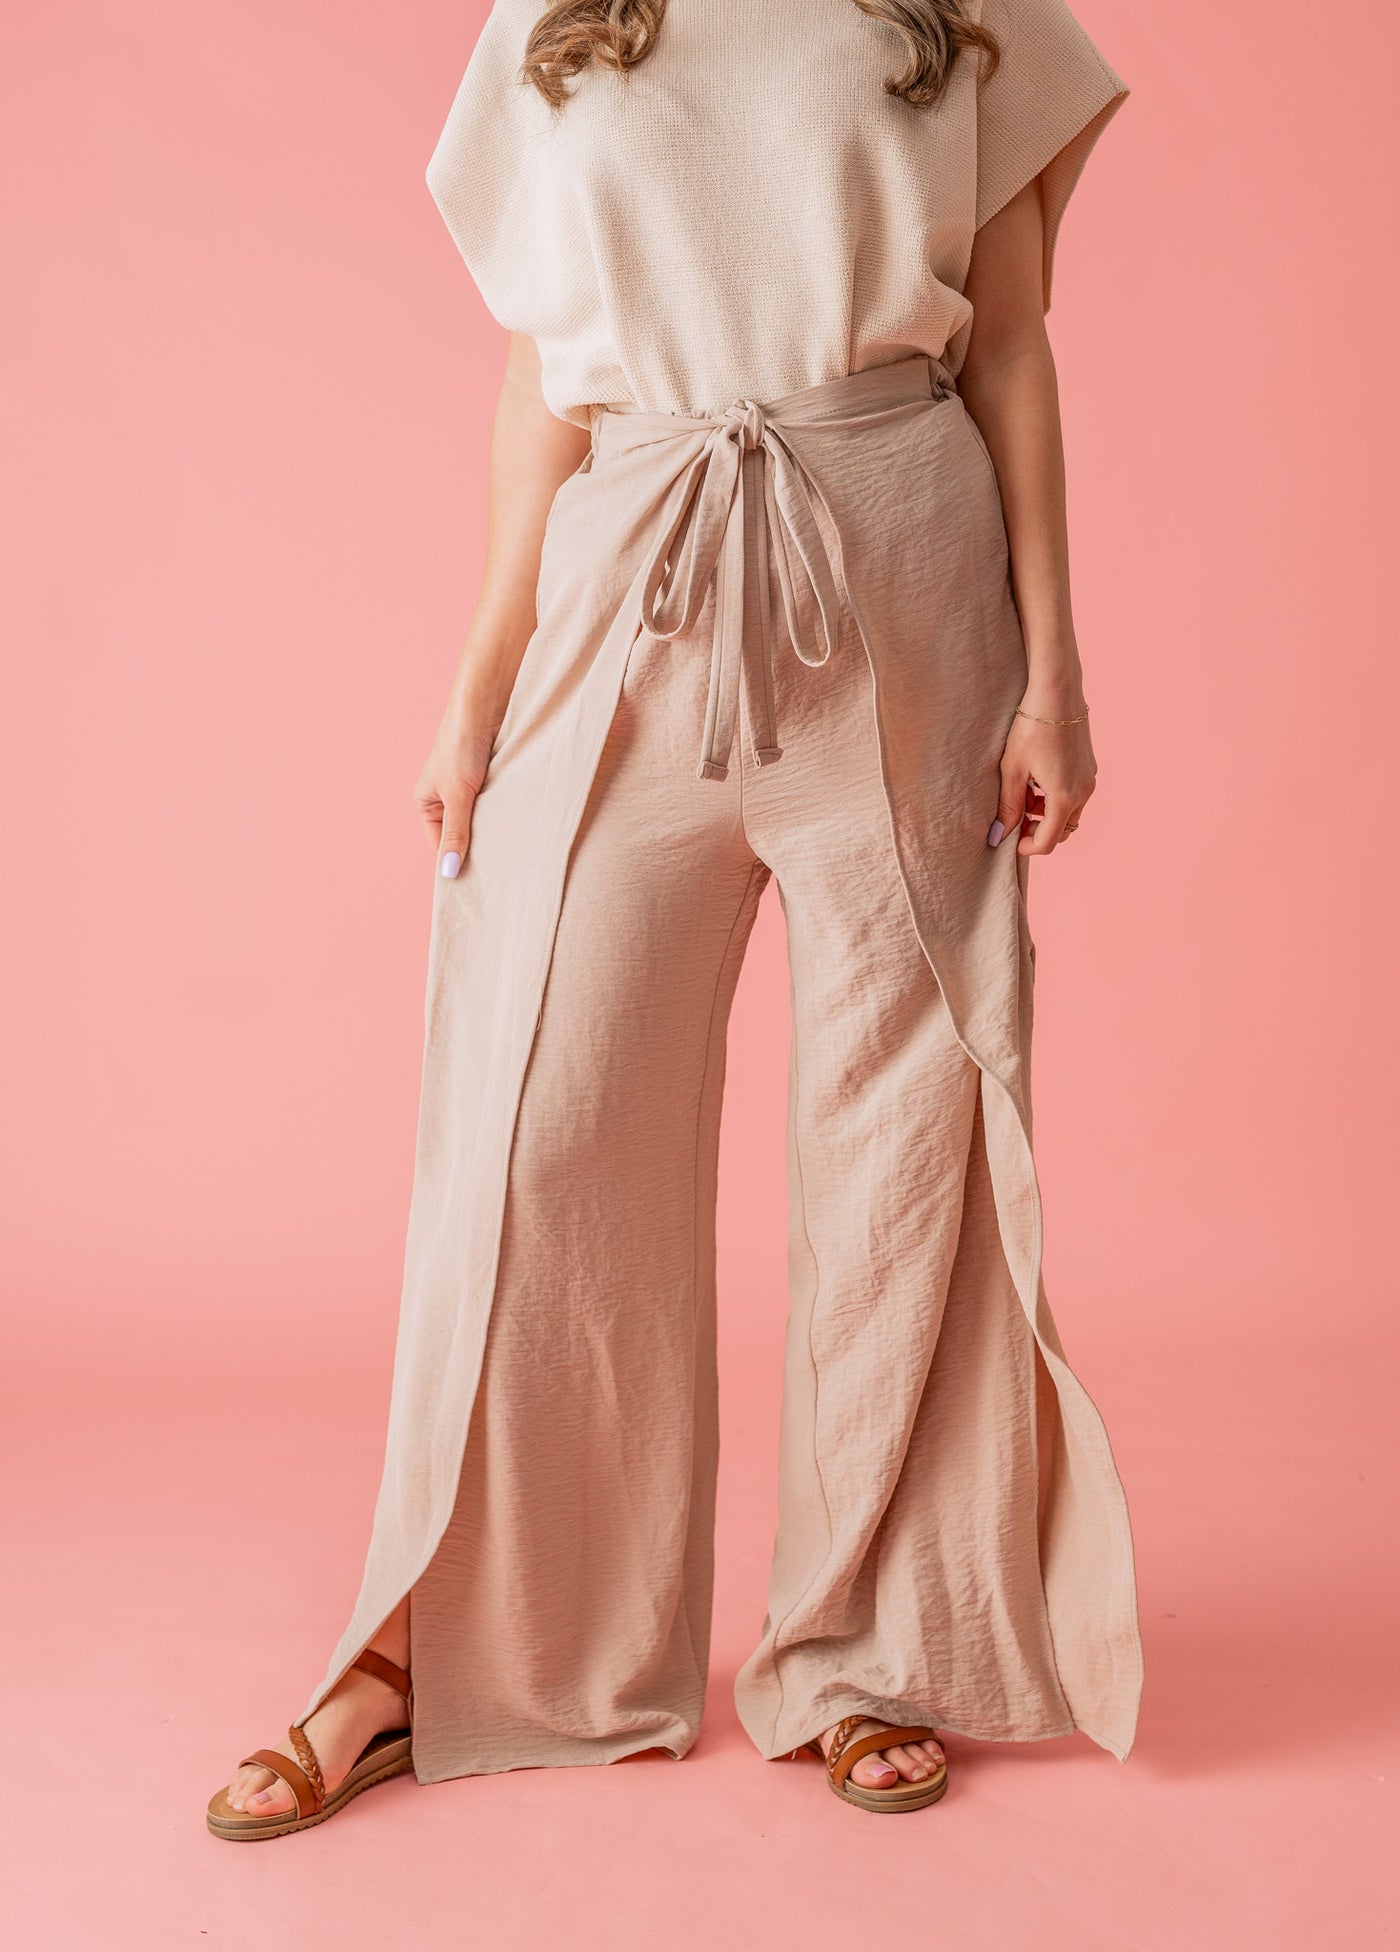 Get Ready To Conquer Wrap Front Pants